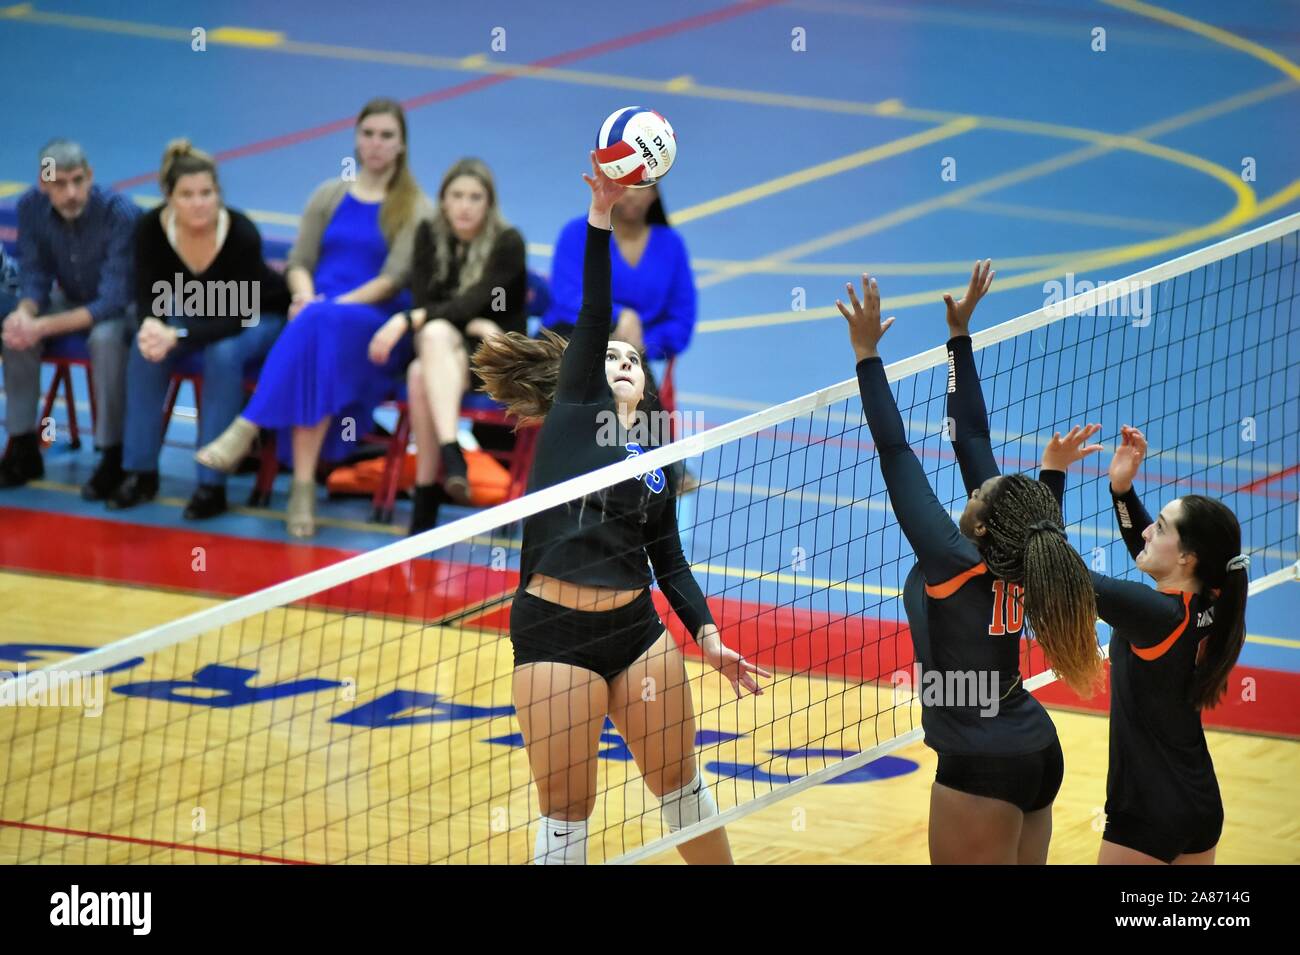 Player attempting to deliver a kill shot past two opponents about to  try to block the effort.  USA. Stock Photo